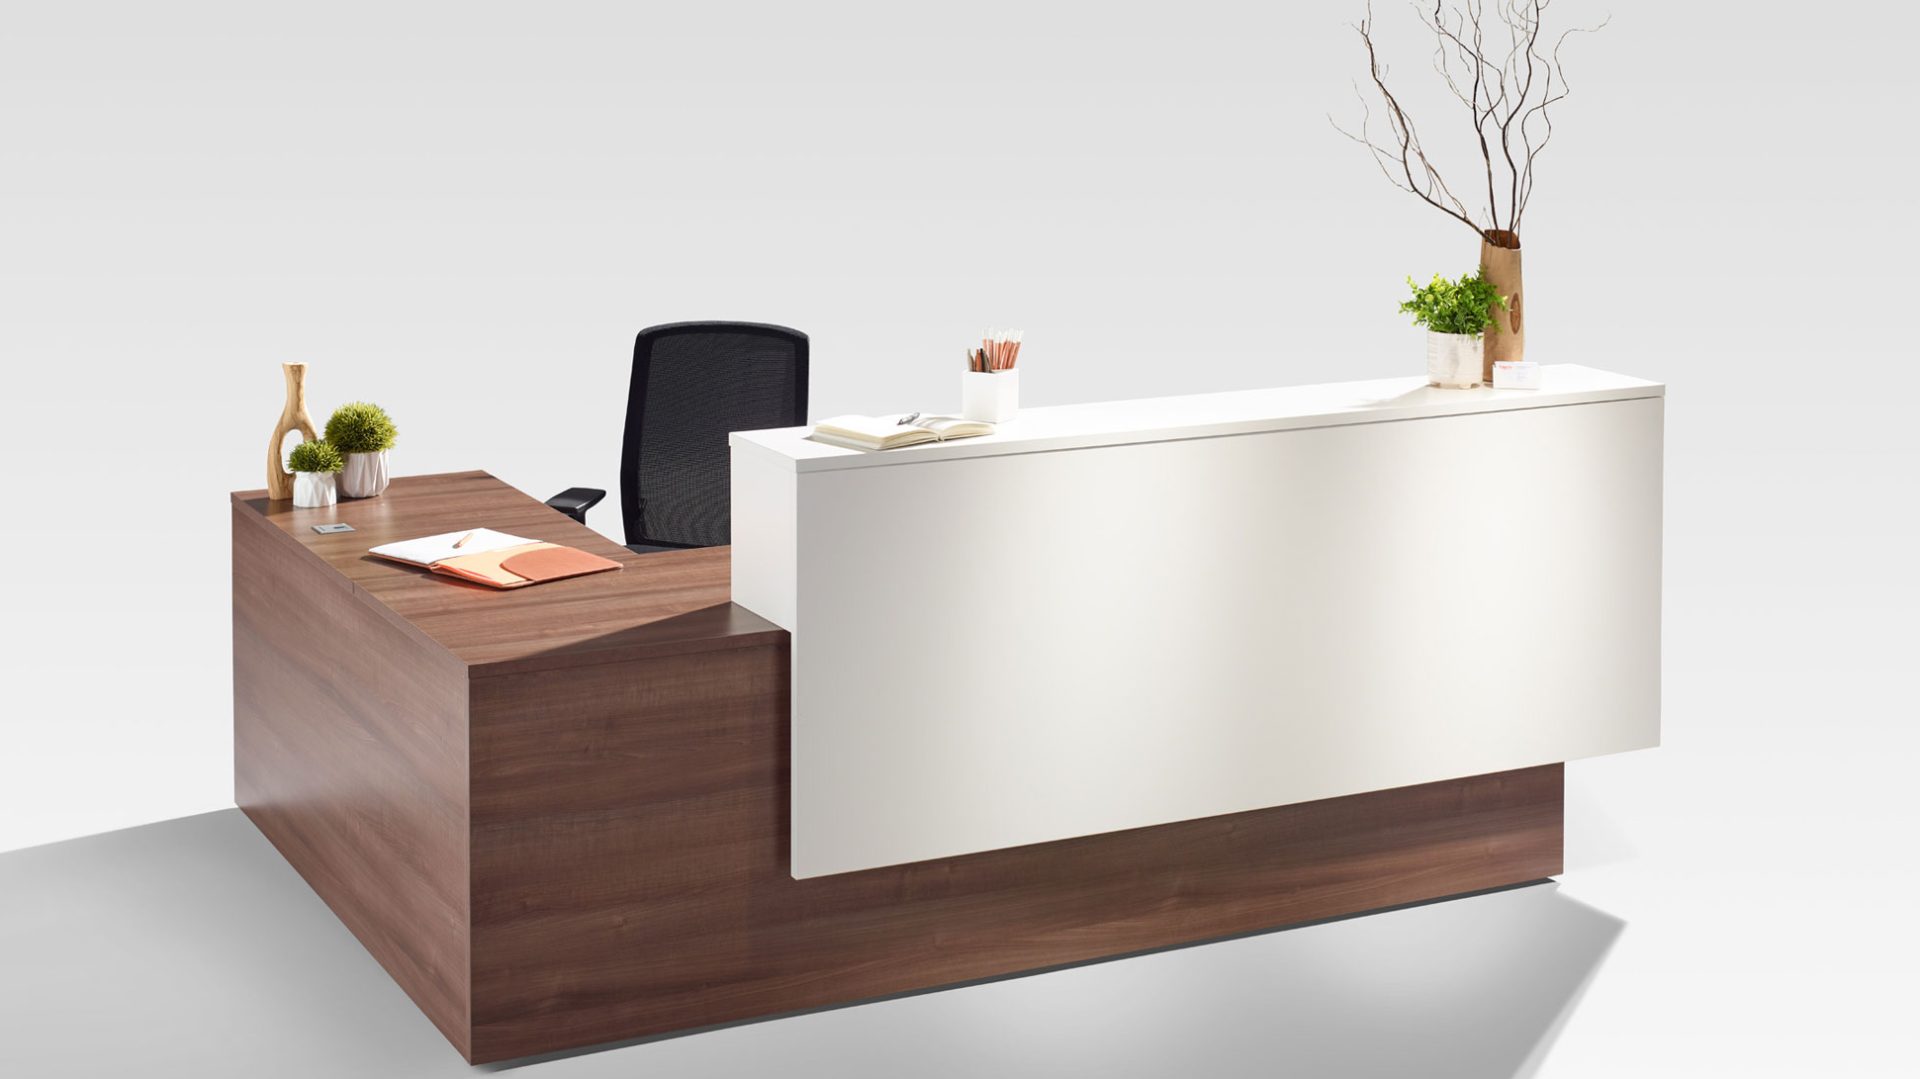 <h1>Elevate Your First Impression With Tayco’s Reception Collection</h1>